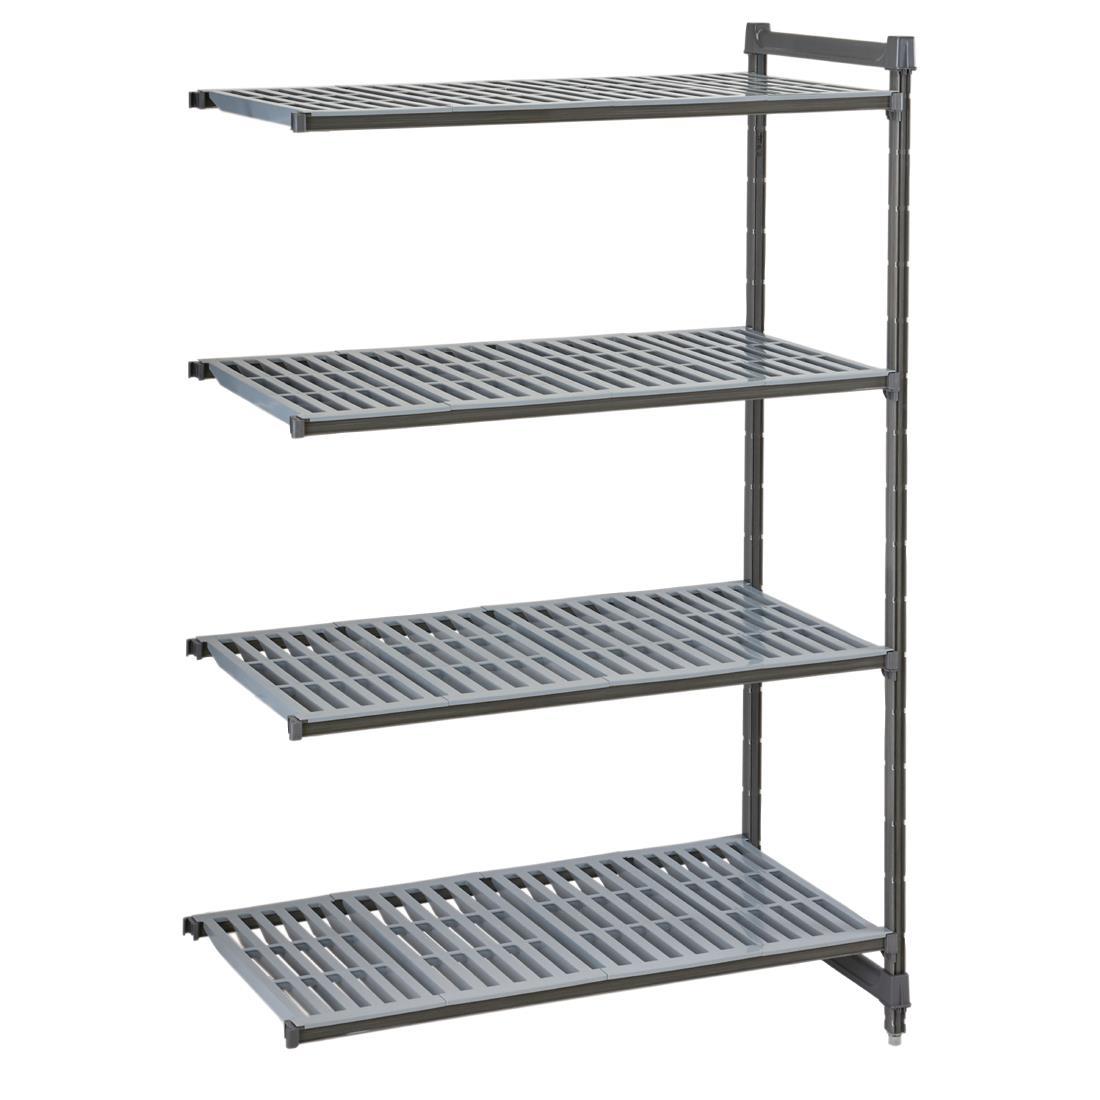 Cambro Camshelving Basics Plus Add-On Unit 4 Tier With Vented Shelves 1830H x 1328W x 460D mm